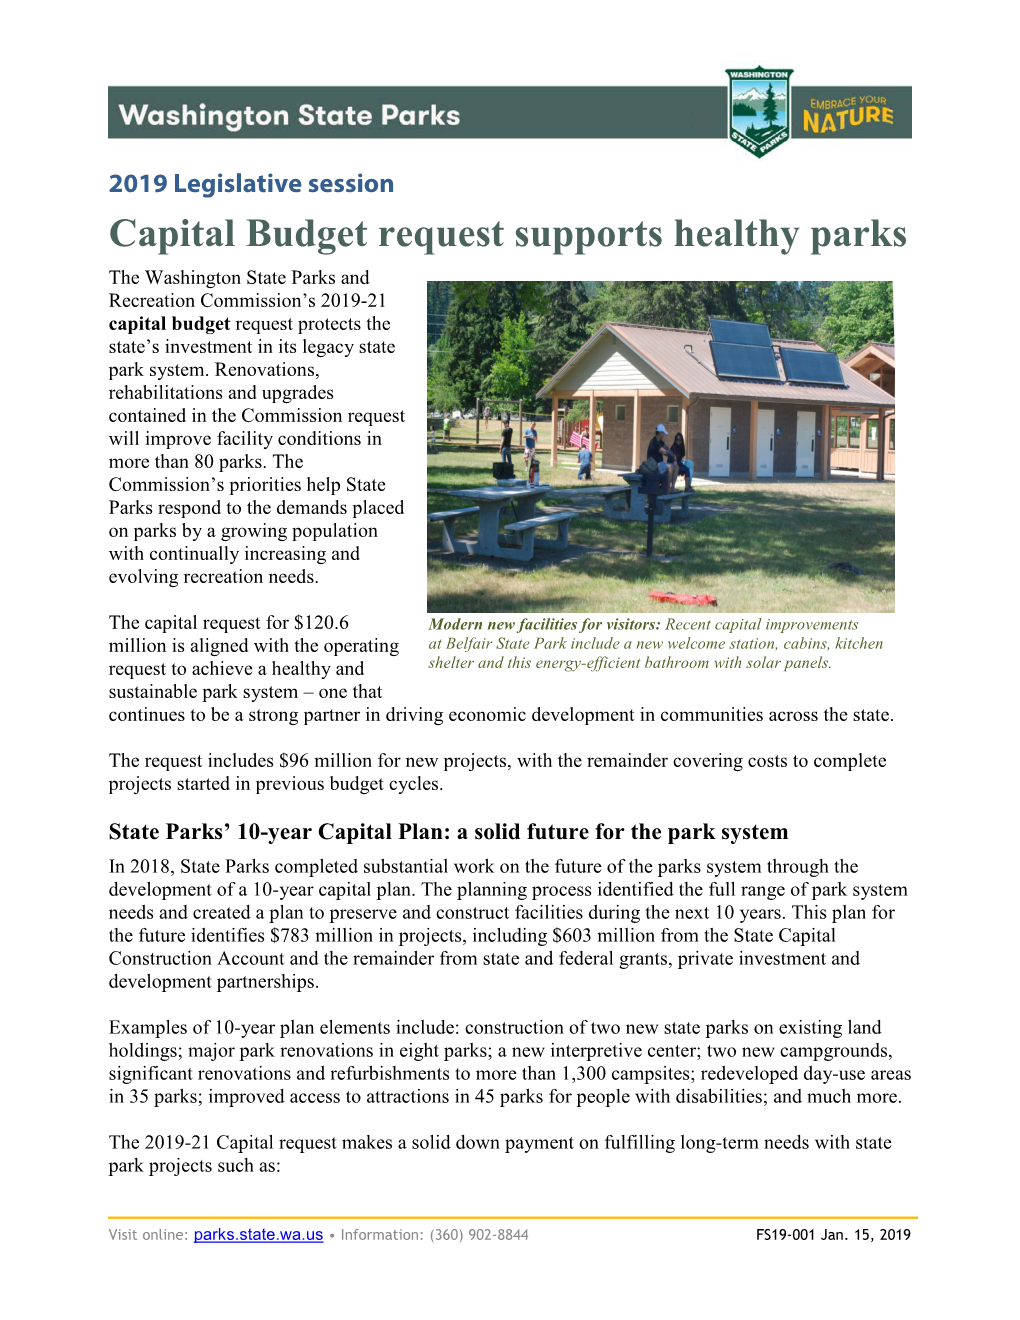 Capital Budget Request Supports Healthy Parks